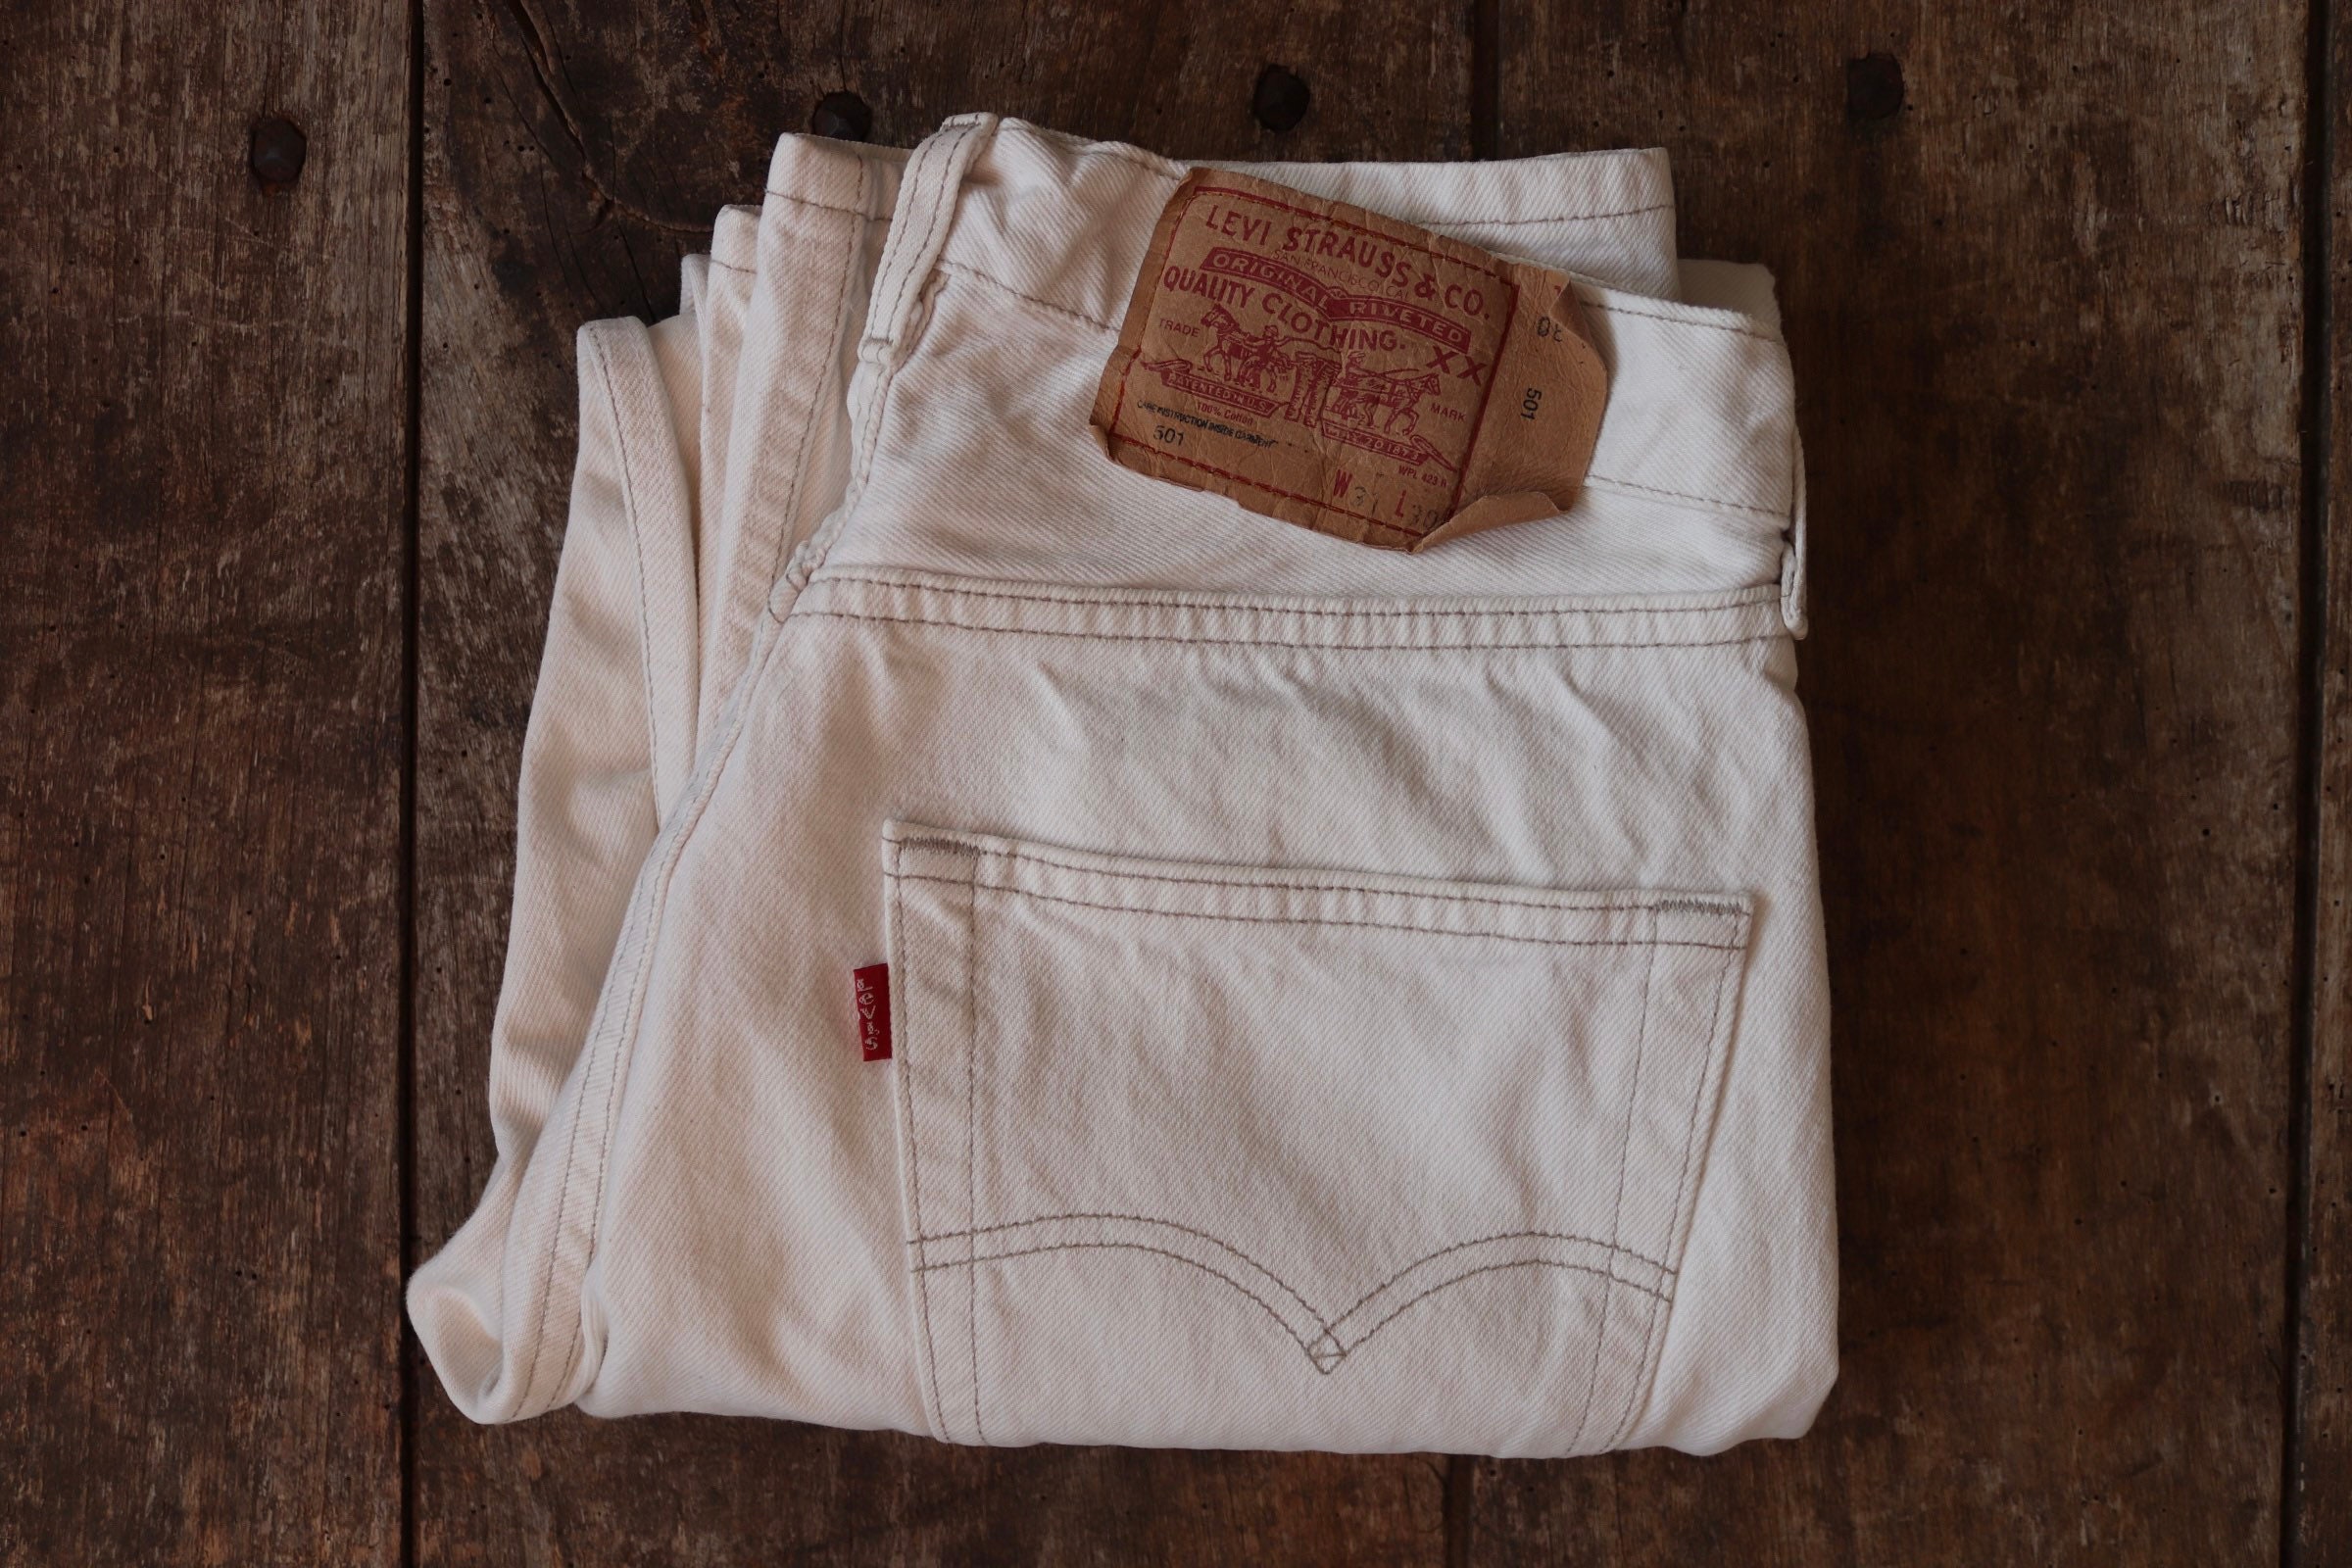 Vintage 1990s 90s Levis 501 Levi Strauss white red tab small e denim jeans  button fly 30” x 29” made in France mod